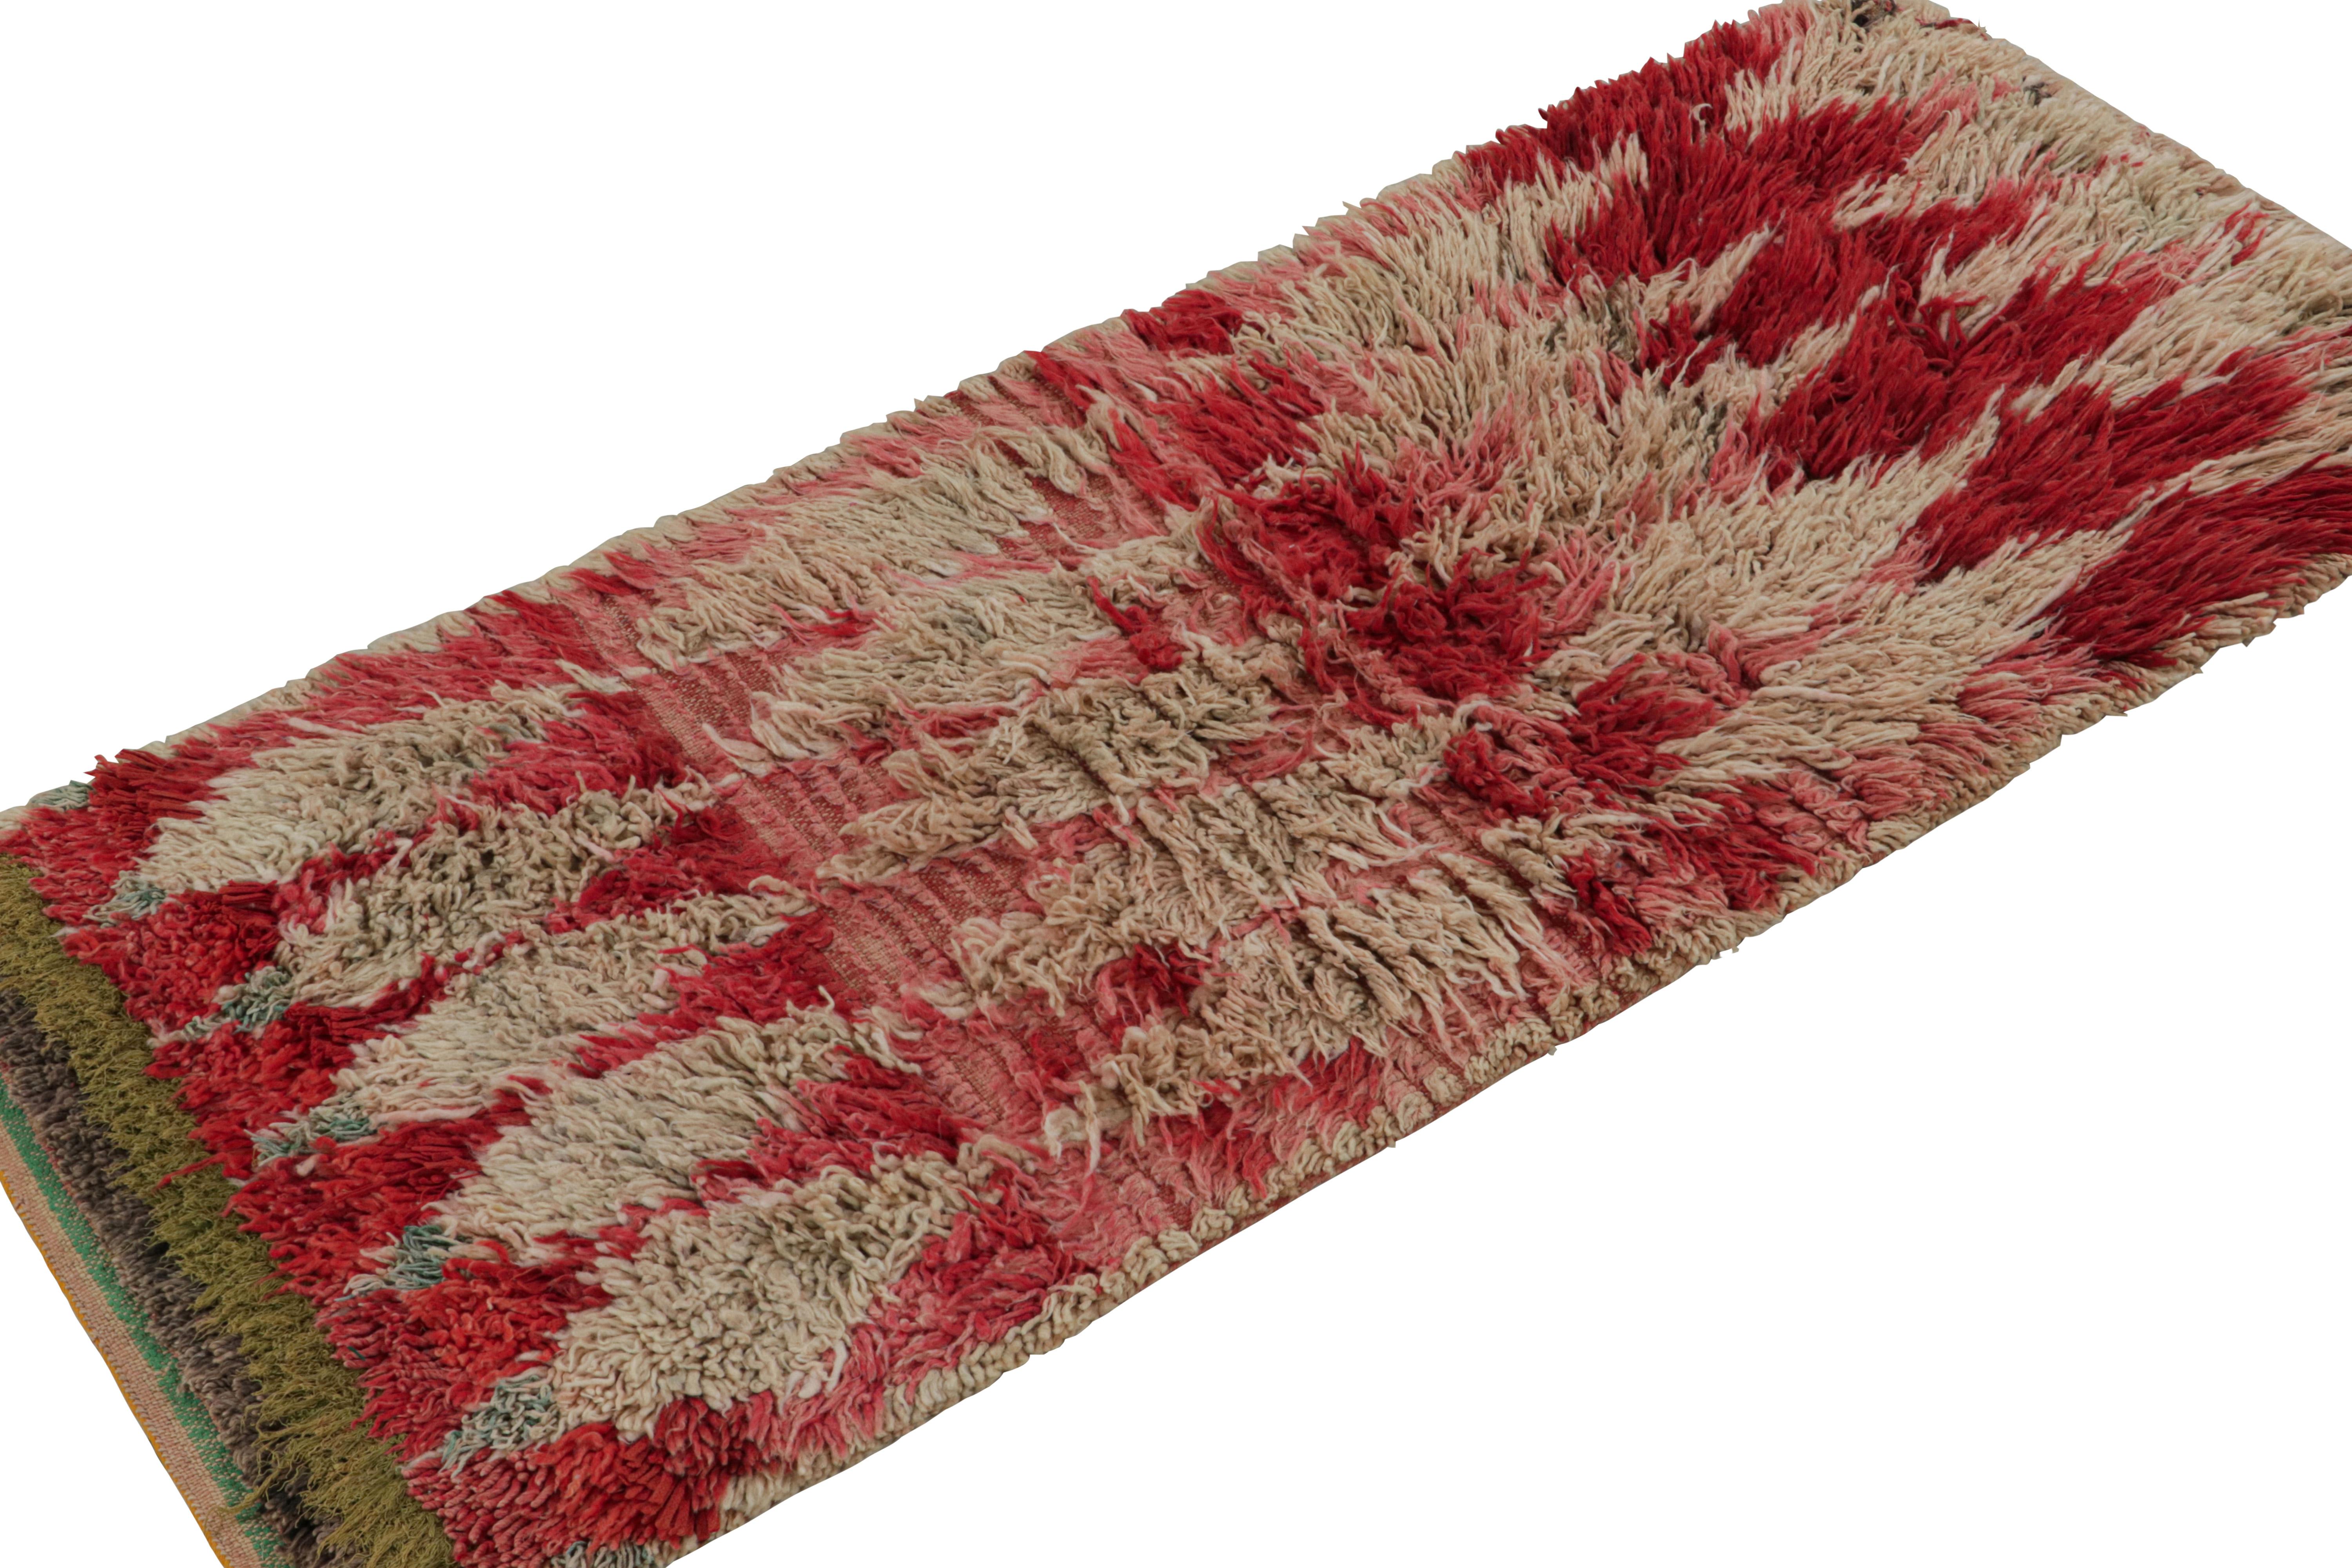 Hand-knotted in wool, circa 1950-1960, this 2x6 vintage Moroccan runner rug is believed to hail from the Azilal tribe. 

On the Design: 

This piece enjoys a lush high pile with taupe field and primitivist Berber pink and red geometric lozenges